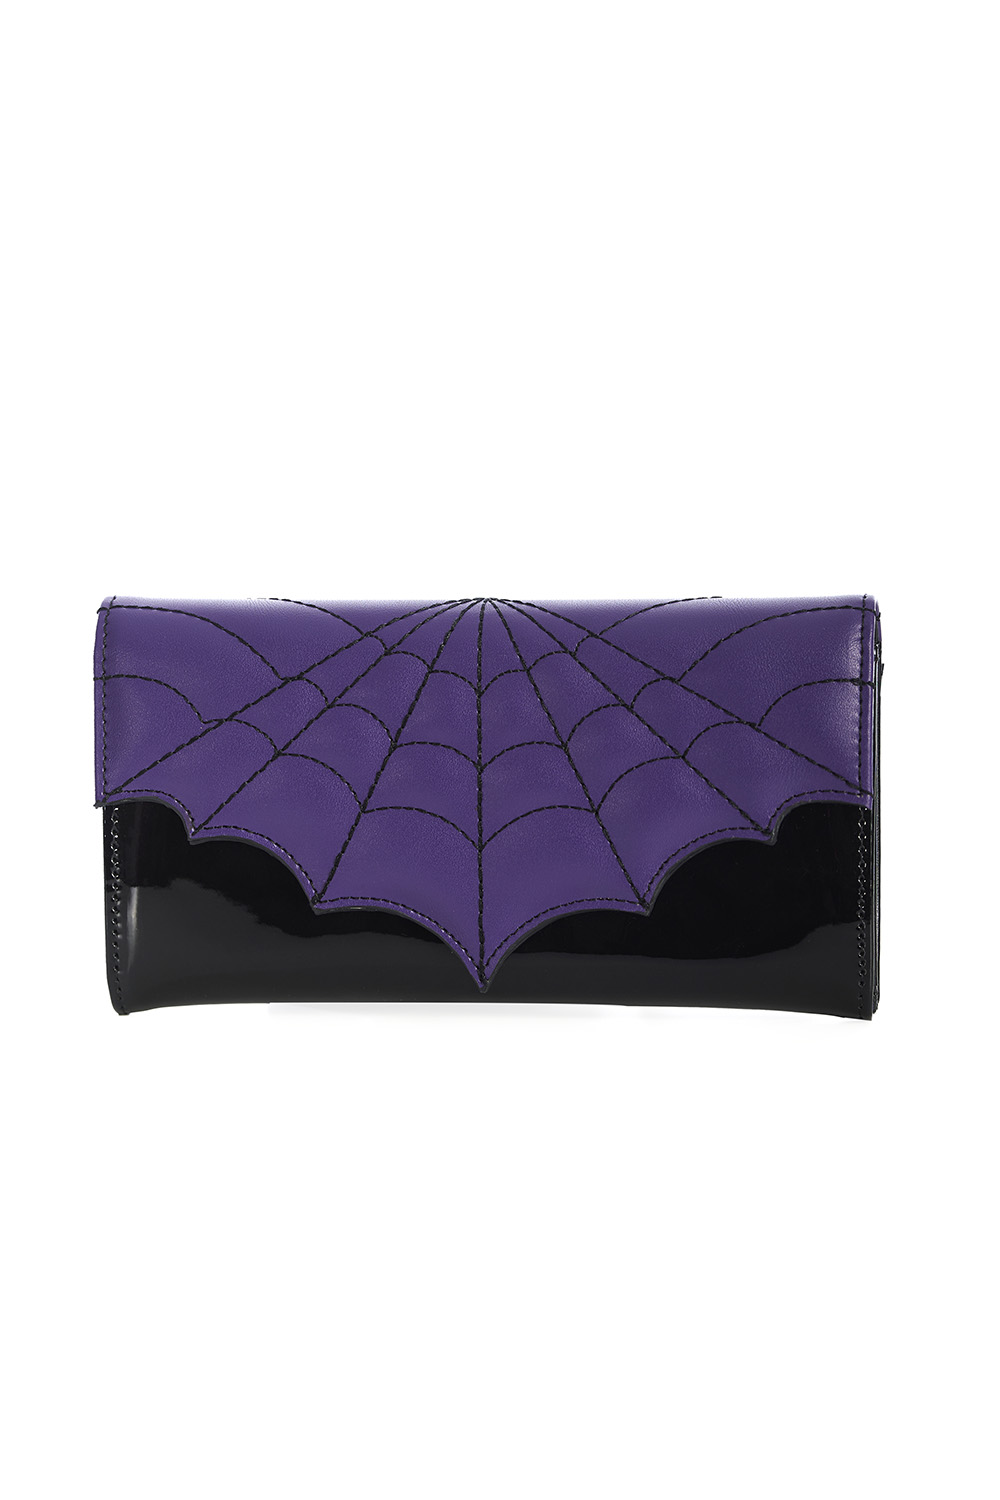 GODS AND MONSTERS WALLET BRAND : LOST QUEEN